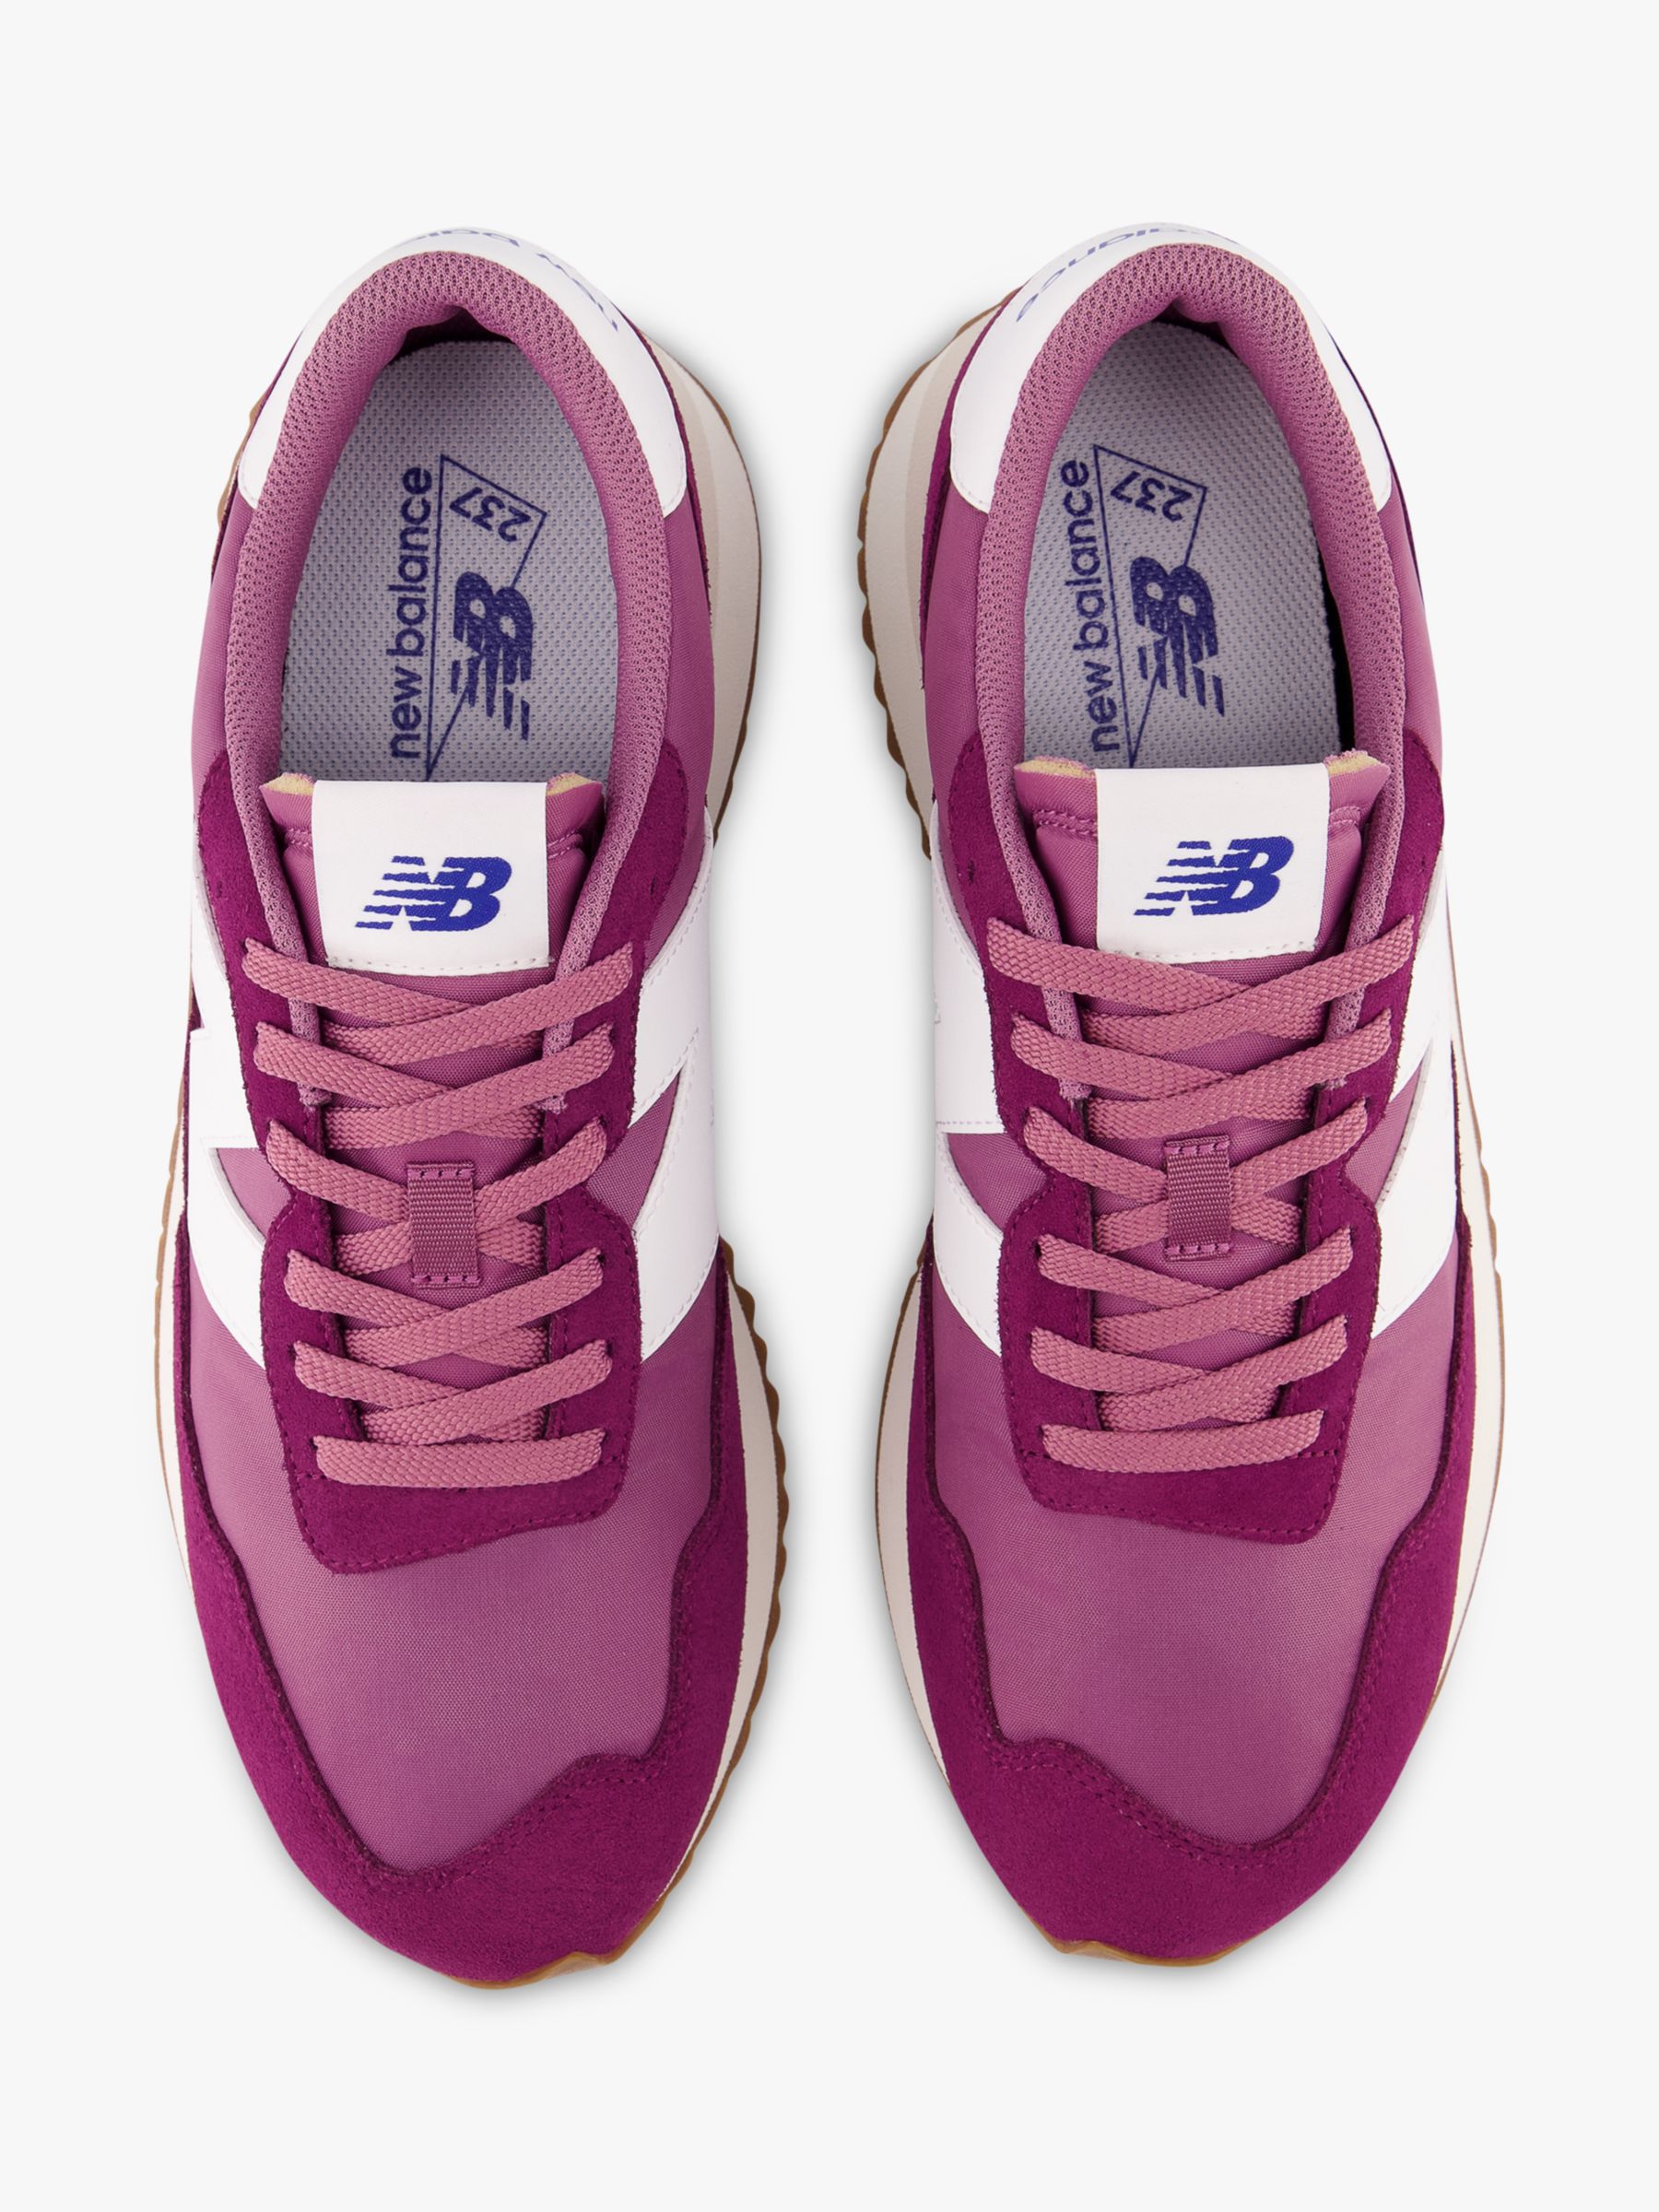 New Balance Women's 237 Trainers, Berry/Burgundy at John Lewis & Partners